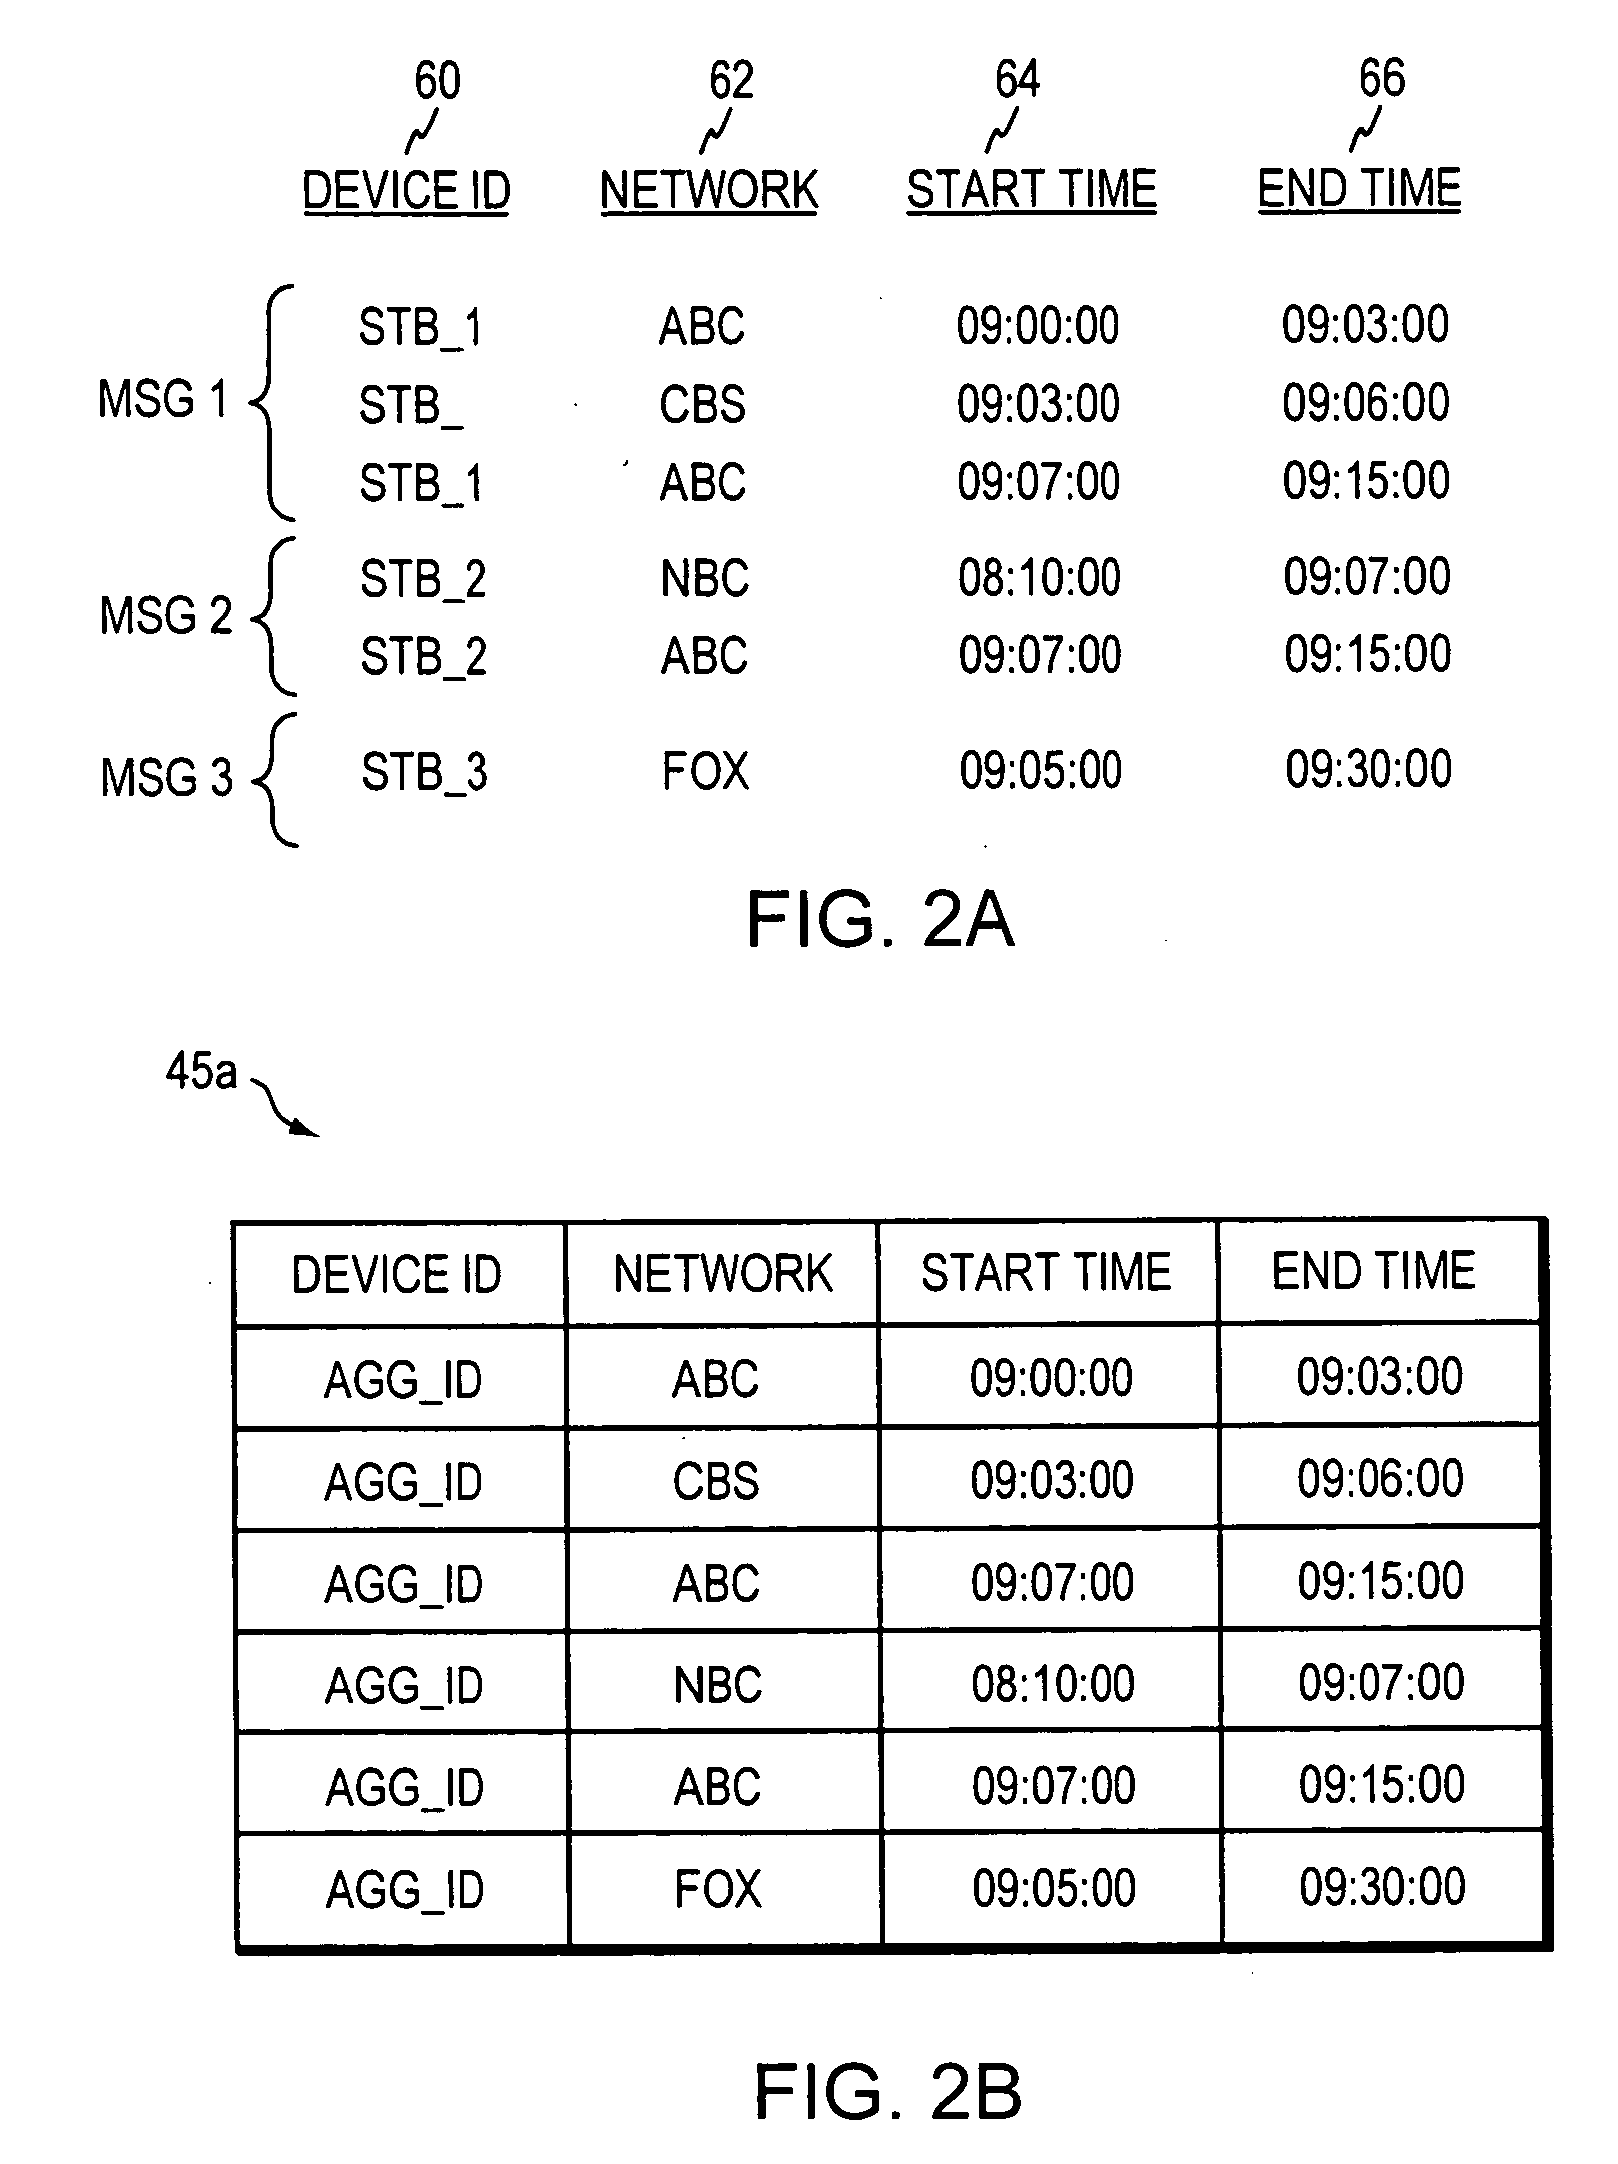 System and method of anonymous settop event collection and processing in a multimedia network